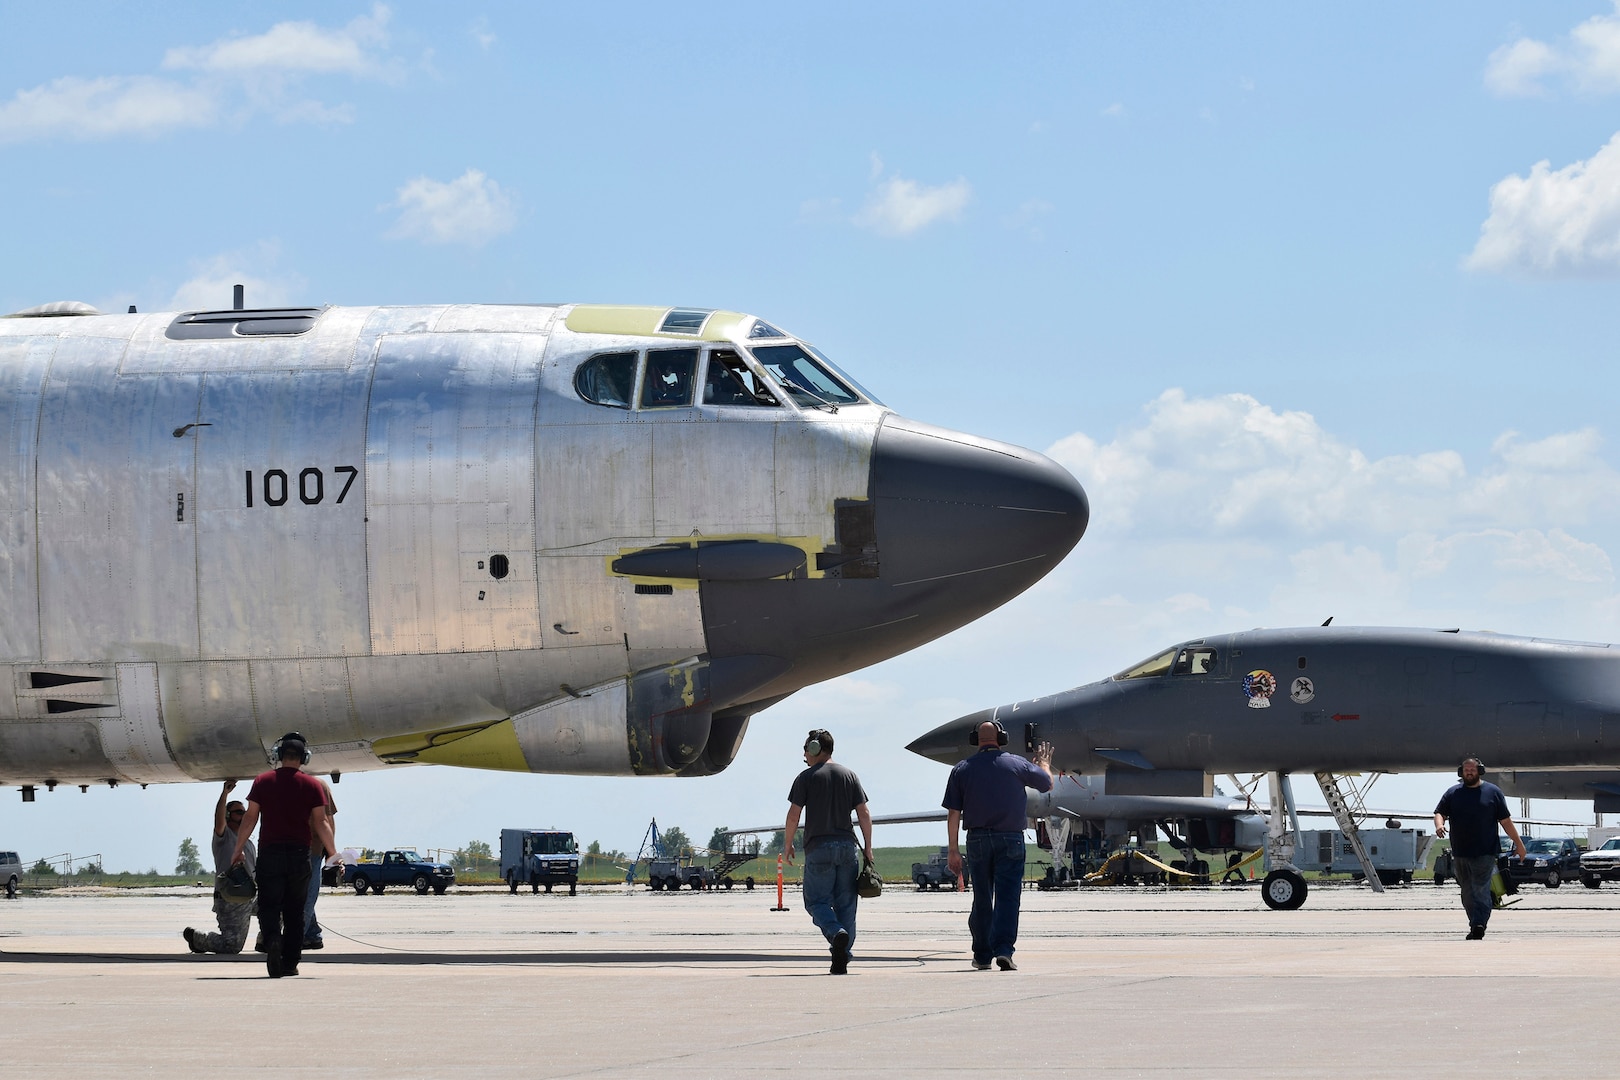 Maintenance personnel from the 565th Aircraft Maintenance Squadron work under and around B-52H 61-0007, 'Ghost Rider,' as the aircraft undergoes checks for an attempted functional test flight at the Oklahoma City Air Logistics Complex, Aug. 29, 2016, Tinker Air Force Base, Okla. 'Ghost Rider' is shown in natural metal as it completes a 19-month overhaul and upgrade to become the first B-52H to ever be regenerated from long-term storage with the 309th Aerospace Maintenance and Regeneration Group at Davis-Monthan AFB, Ariz., and returned to fully-operational flying status. (U.S. Air Force photo/Greg L. Davis)